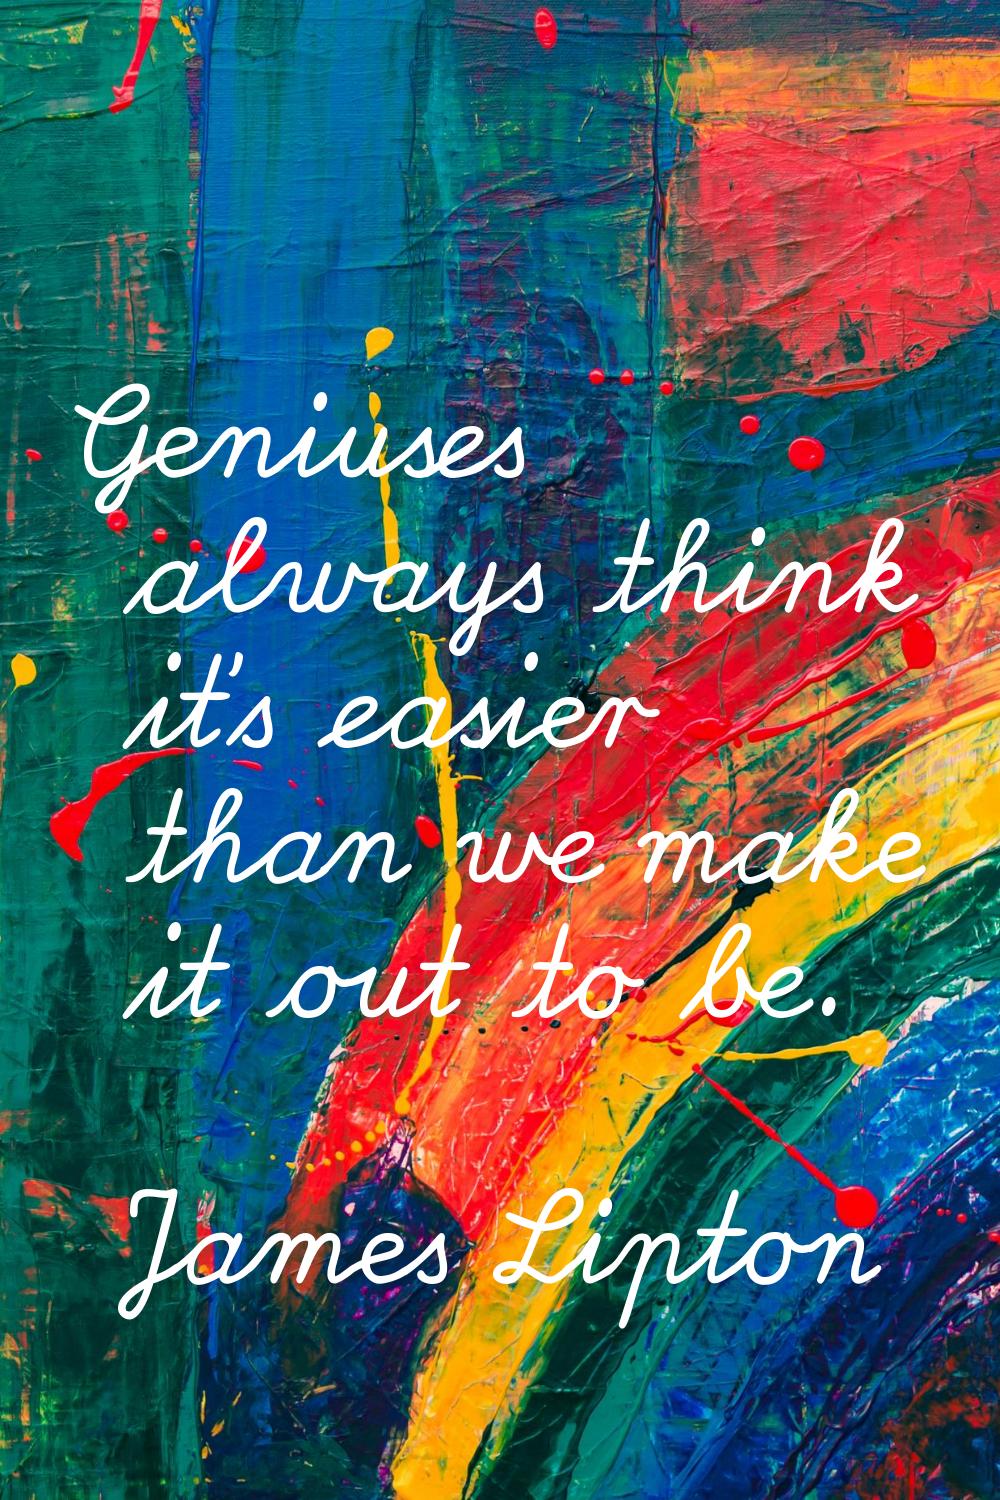 Geniuses always think it's easier than we make it out to be.